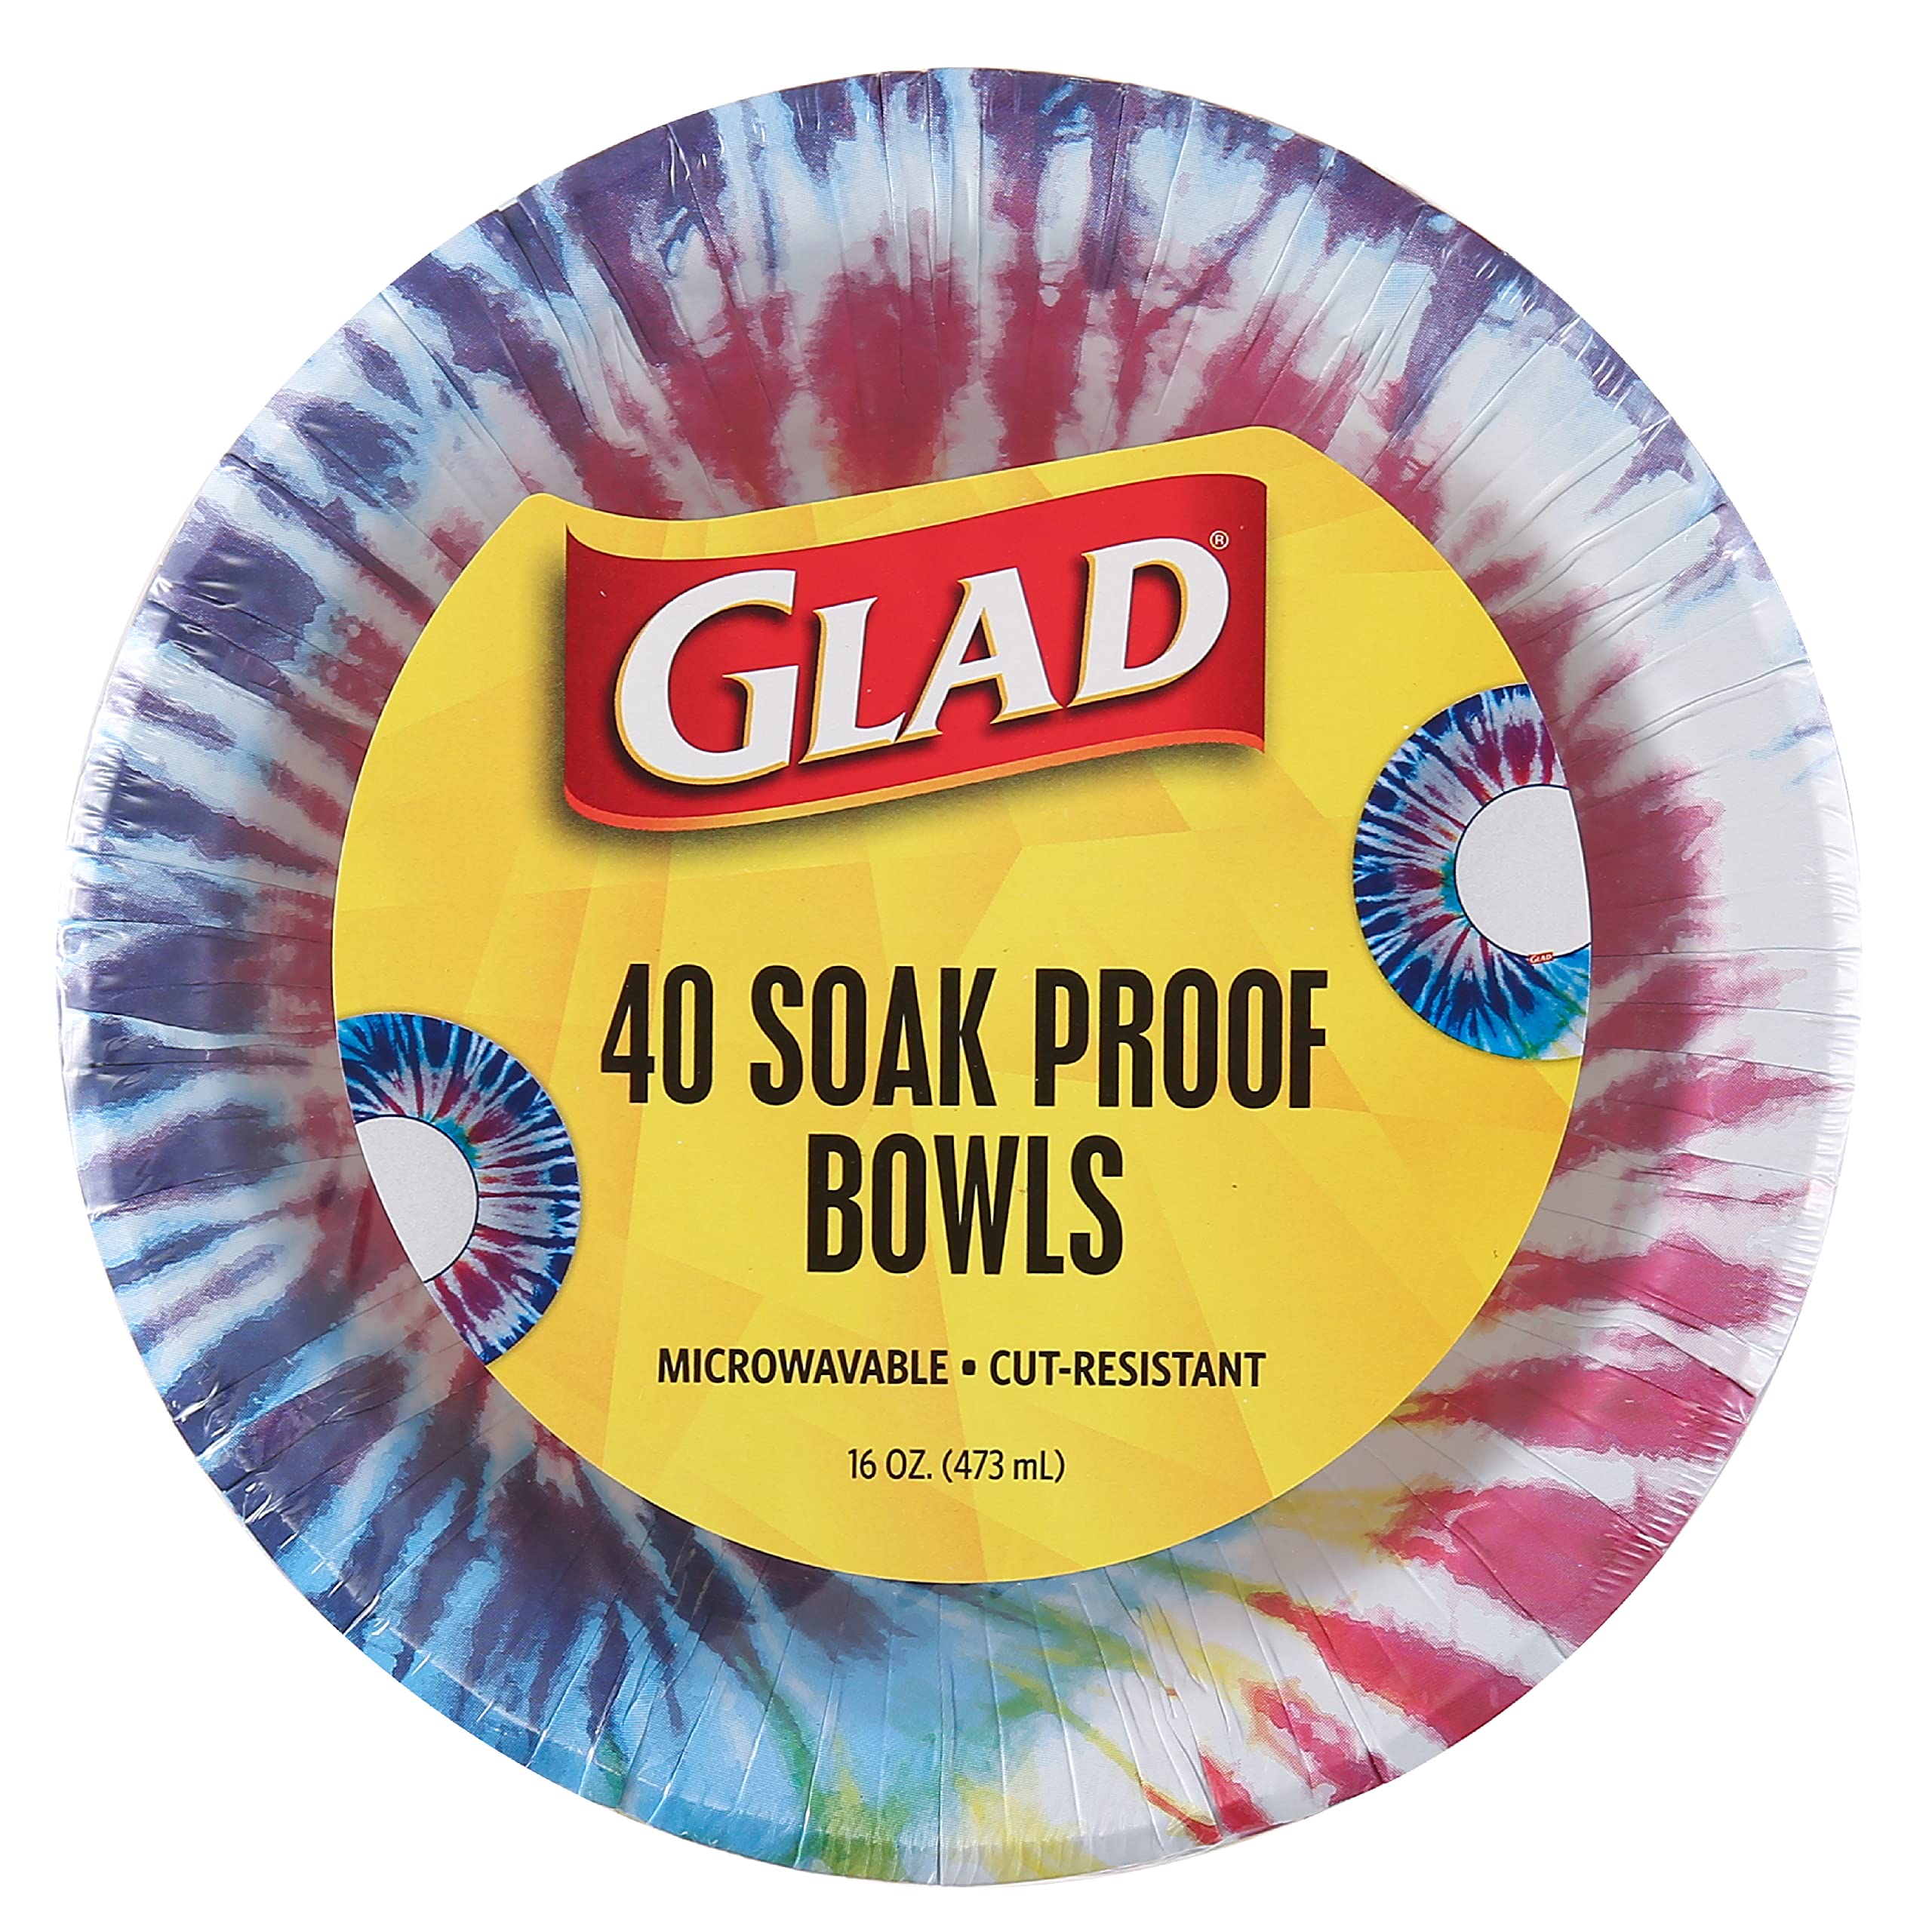 Glad Everyday Round Disposable 10 Paper Plates with Tie Dye Design, Heavy  Duty Soak Proof, Cut-Resistant, Microwavable Paper Plates for All Foods &  Daily Use